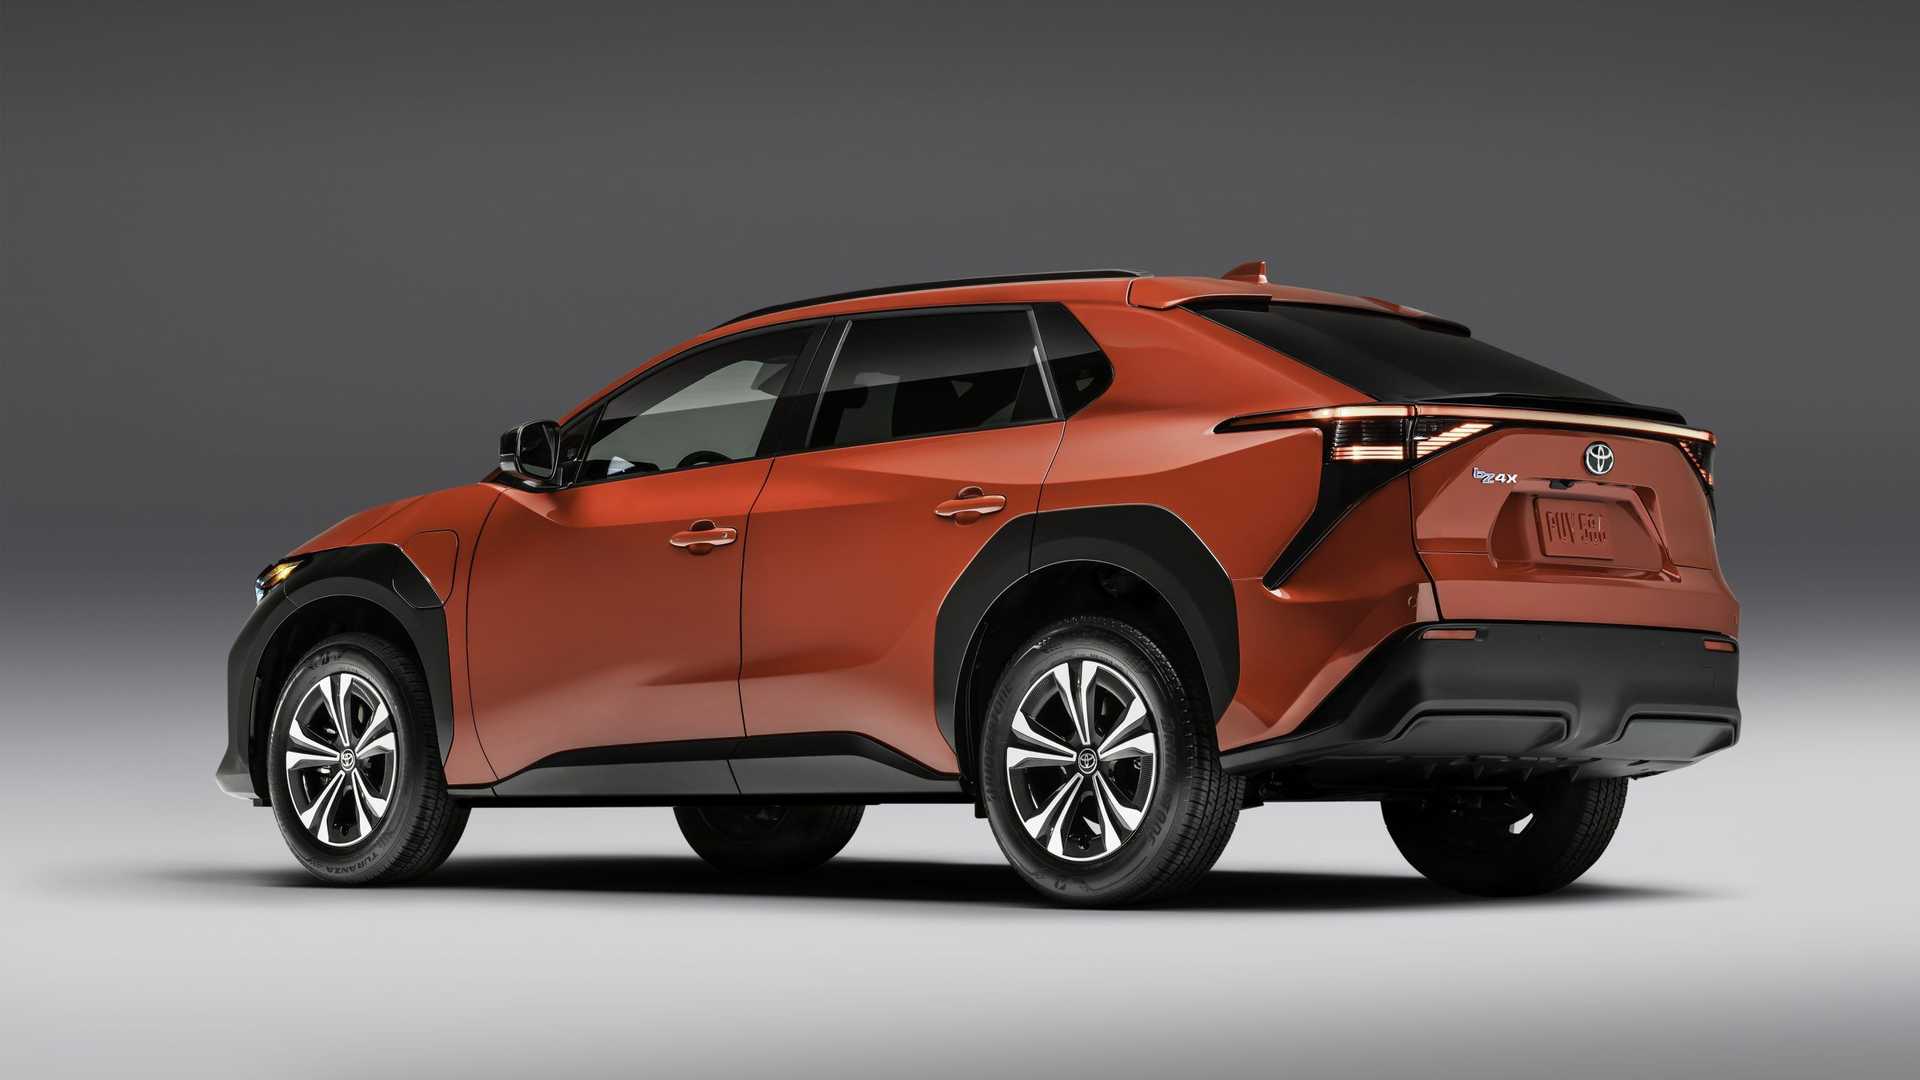 Toyota bZ4X 23 - Toyota bZ4X electric SUV ready for sales launch across Europe